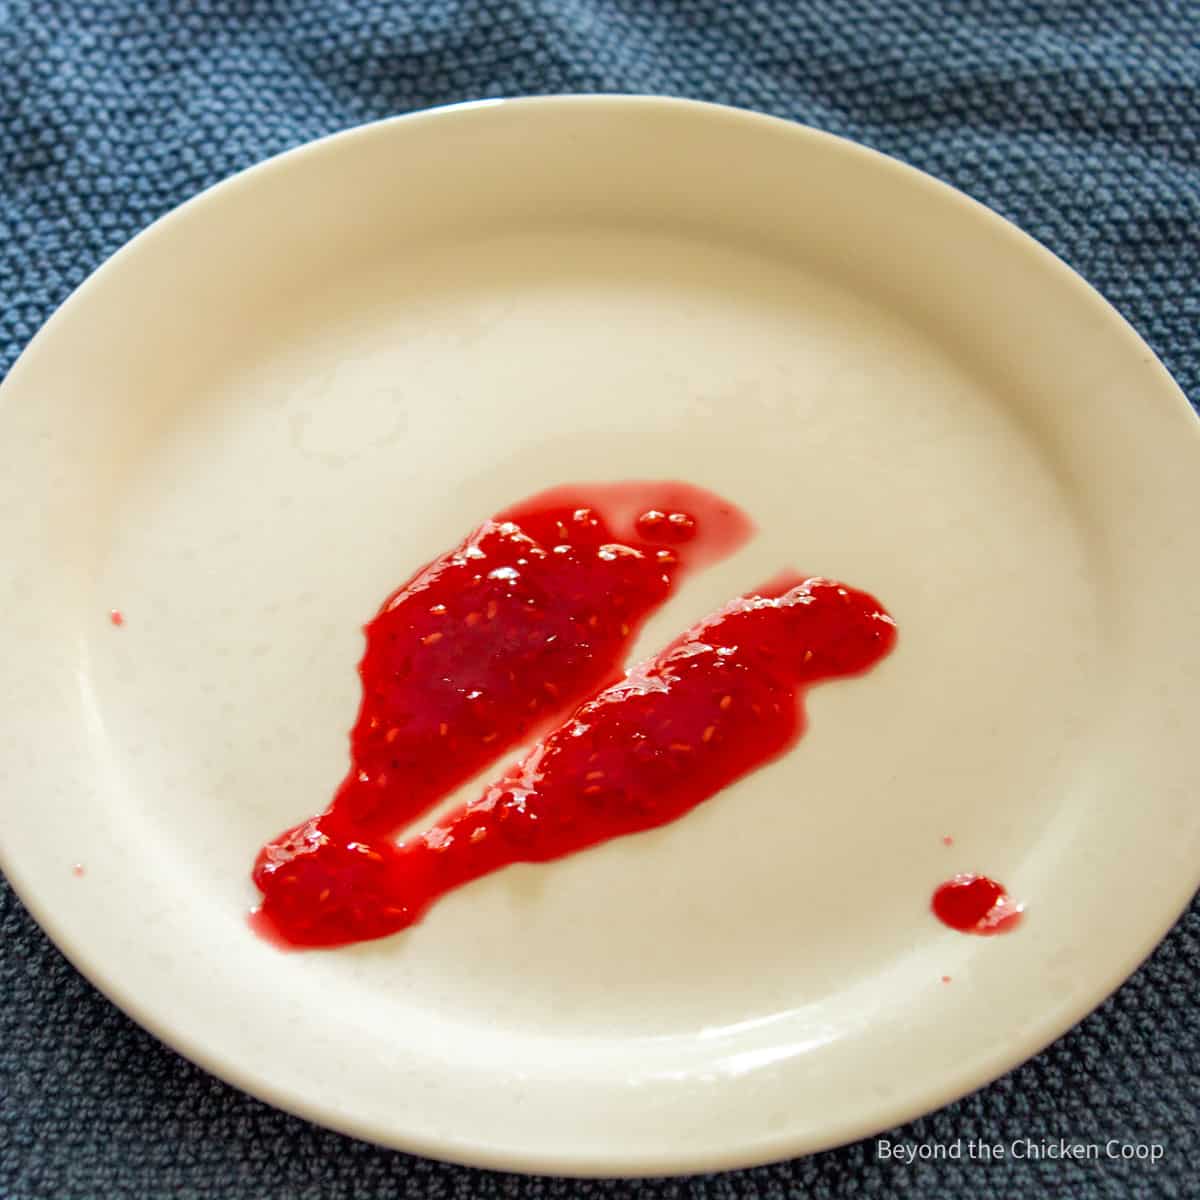 A dollop of jam on a white plate.